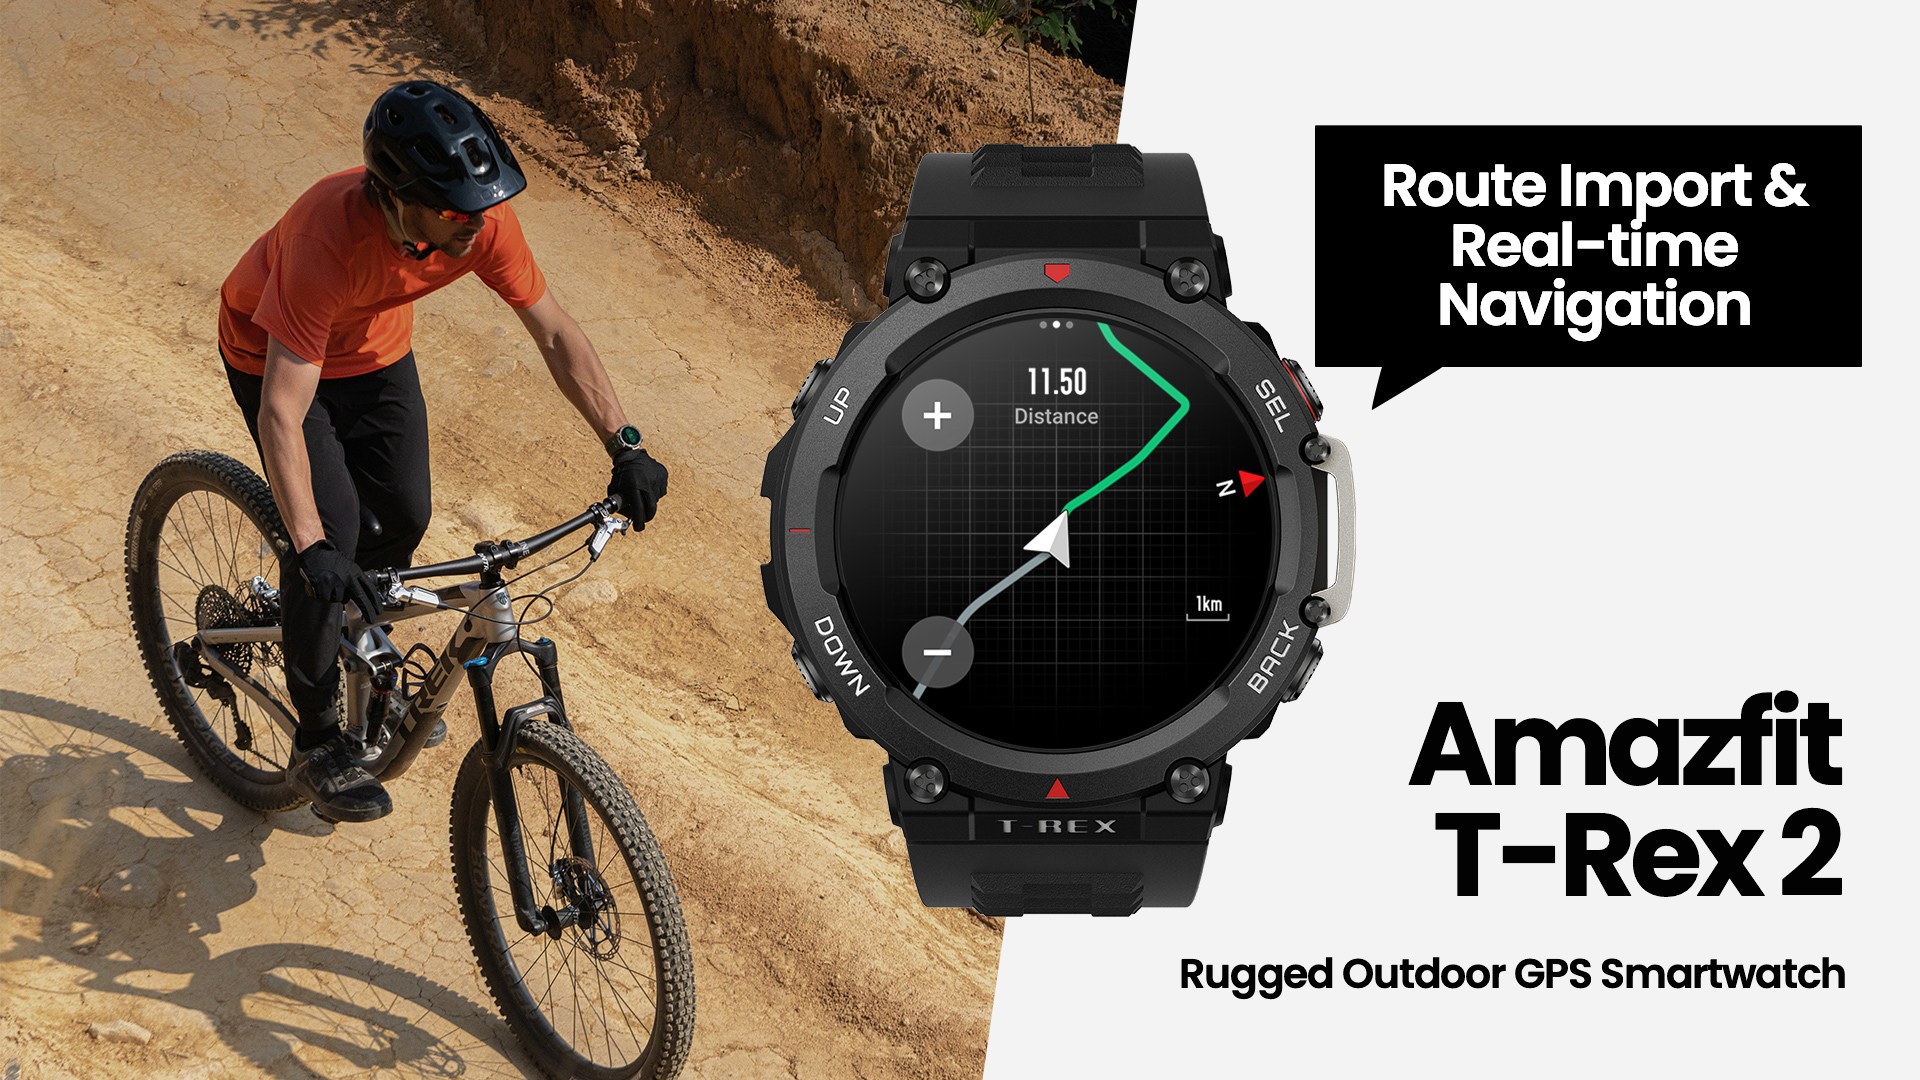 Amazfit's T-Rex 2 GPS smartwatch goes up to 45 days on a single charge at  $163